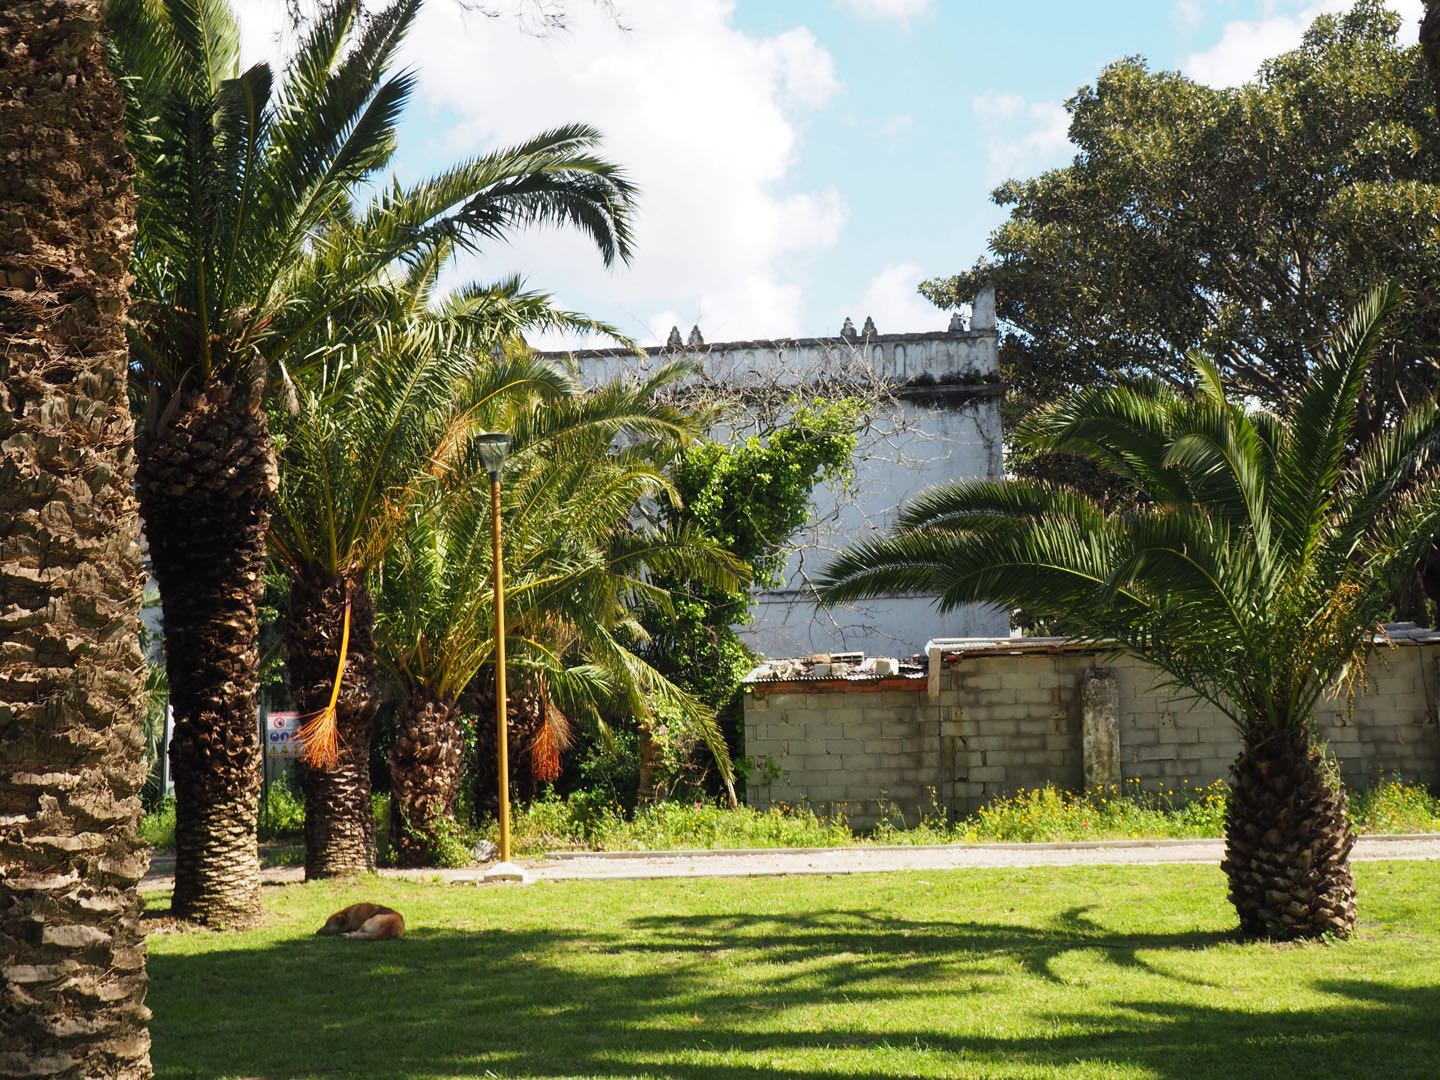 <p>View of the palm trees in the garden, a dog sleeping on the grass</p>